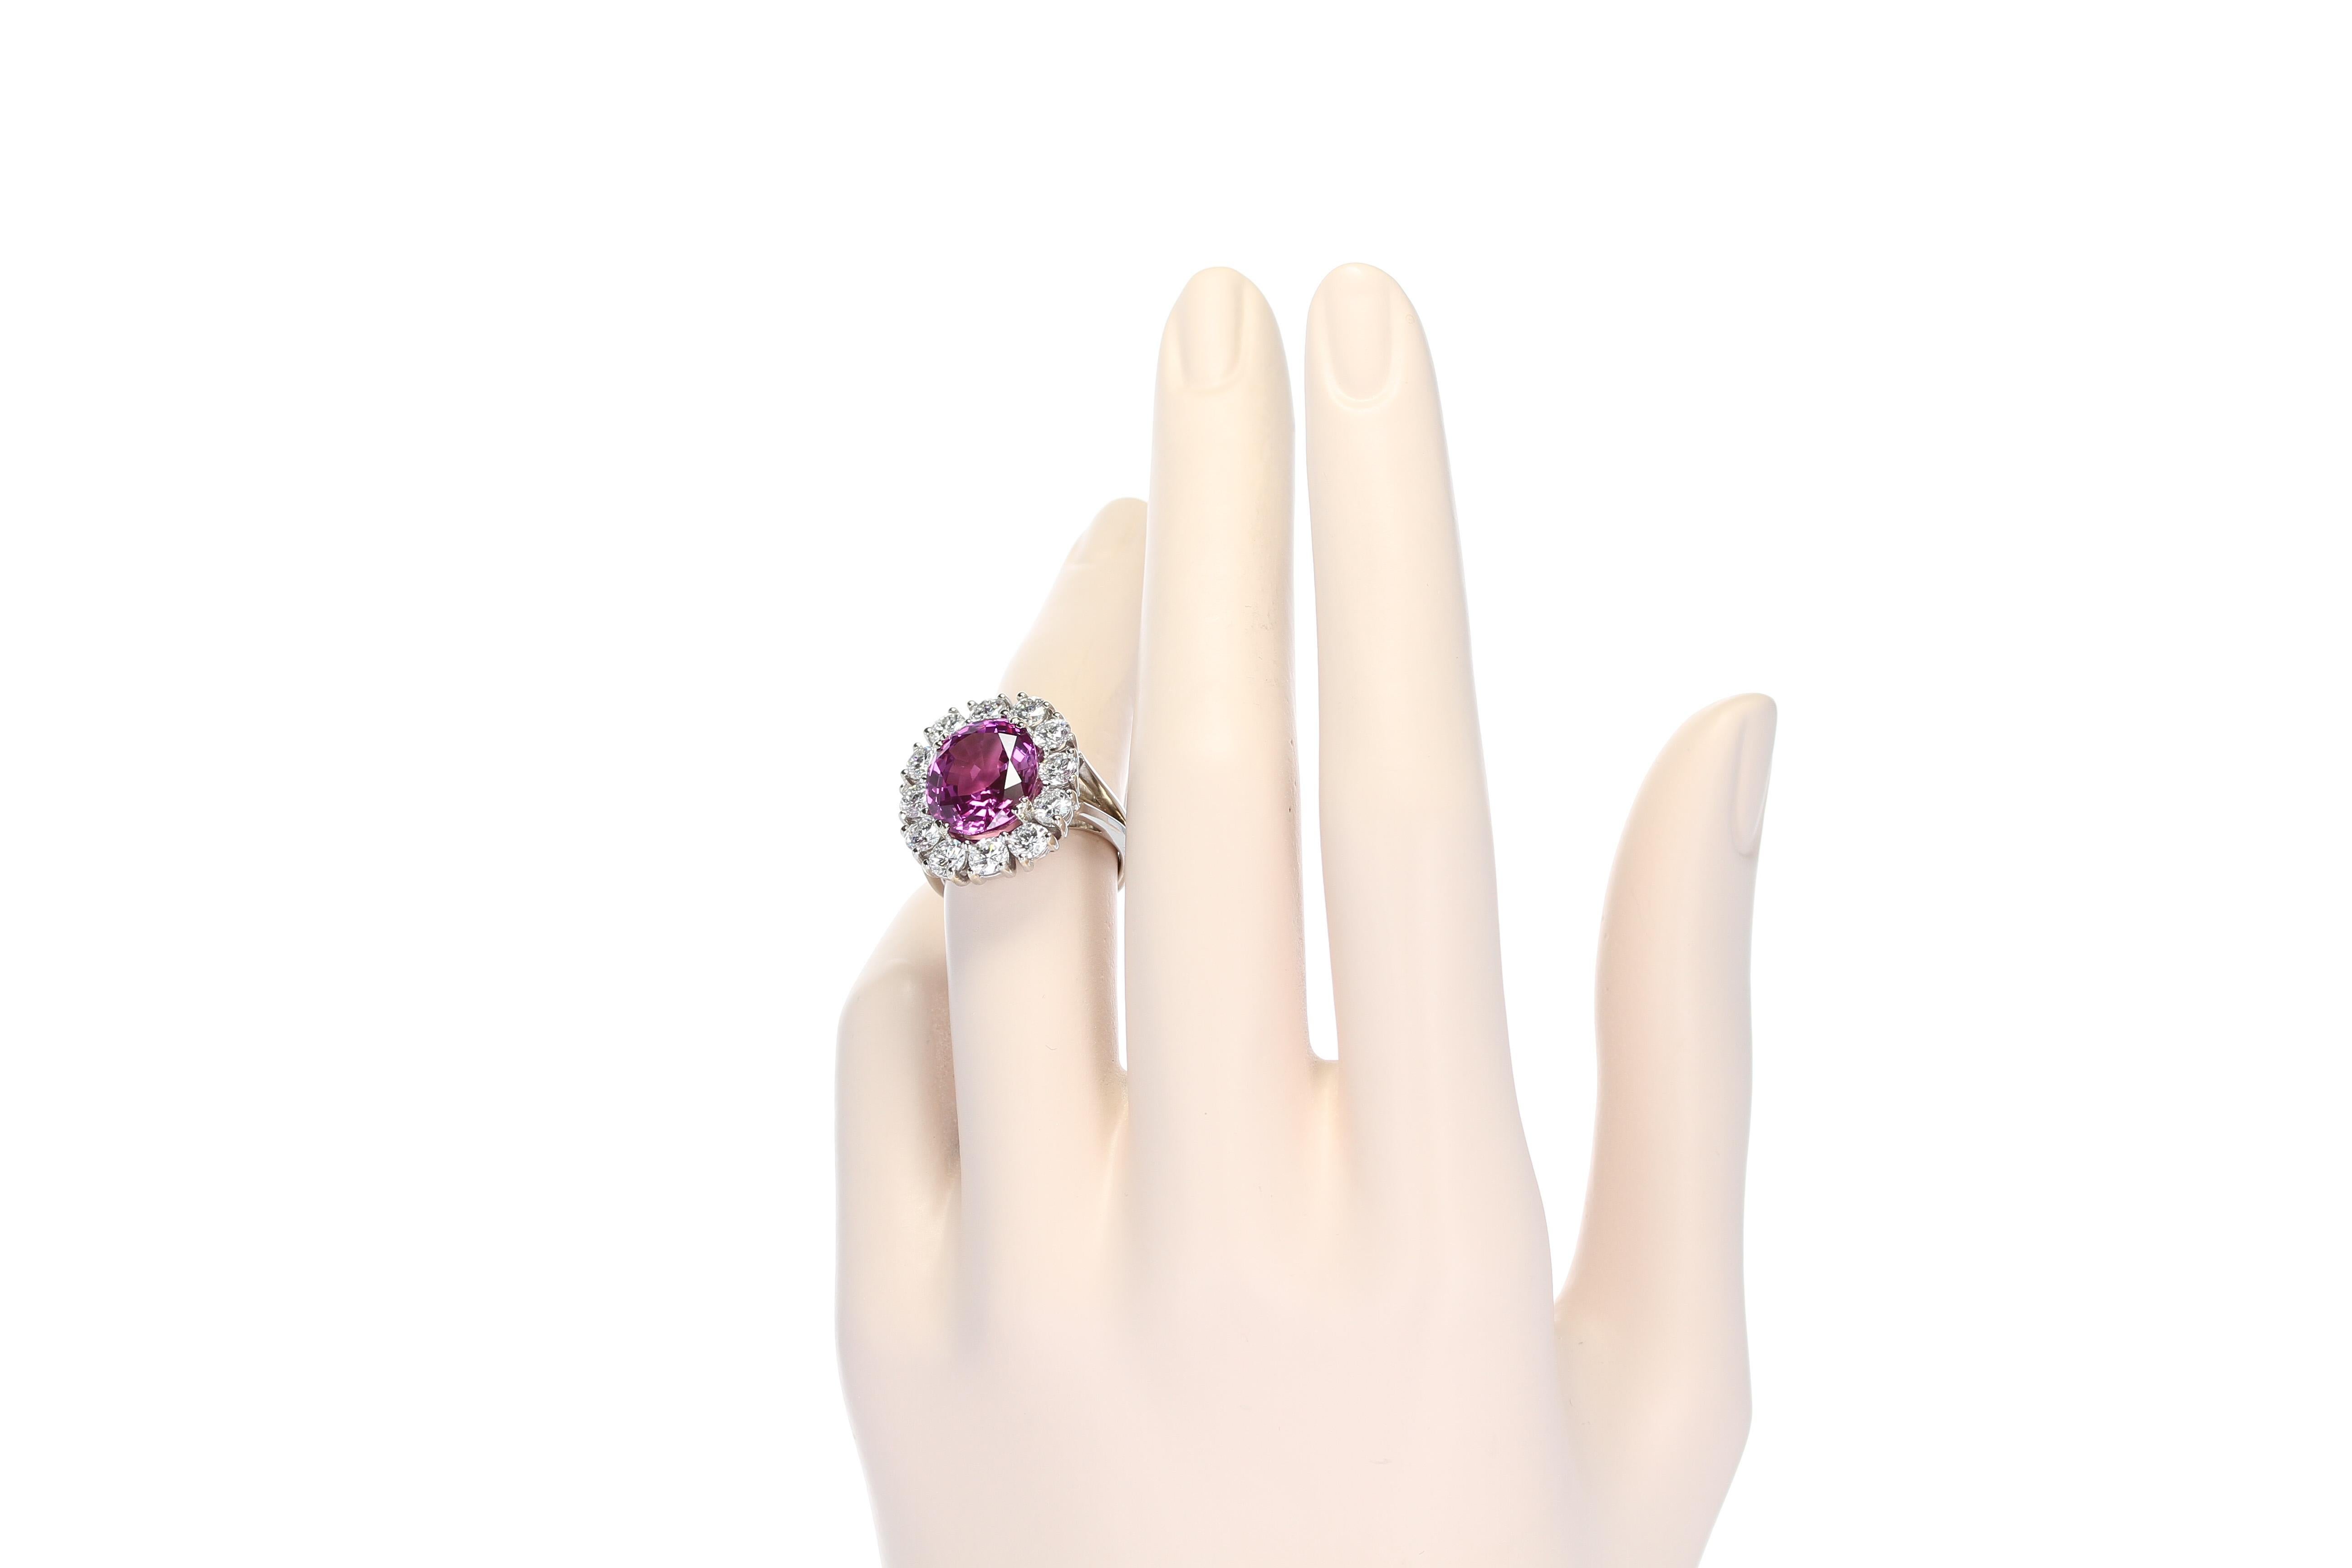 A beautiful and vibrant 10+ carat oval pink sapphire accented with a cluster of twelve round brilliant cut diamonds weighing approximately three carats, with (H/I color, VS-SI clarity), set in 18kt white gold. The pink sapphire displays exceptional